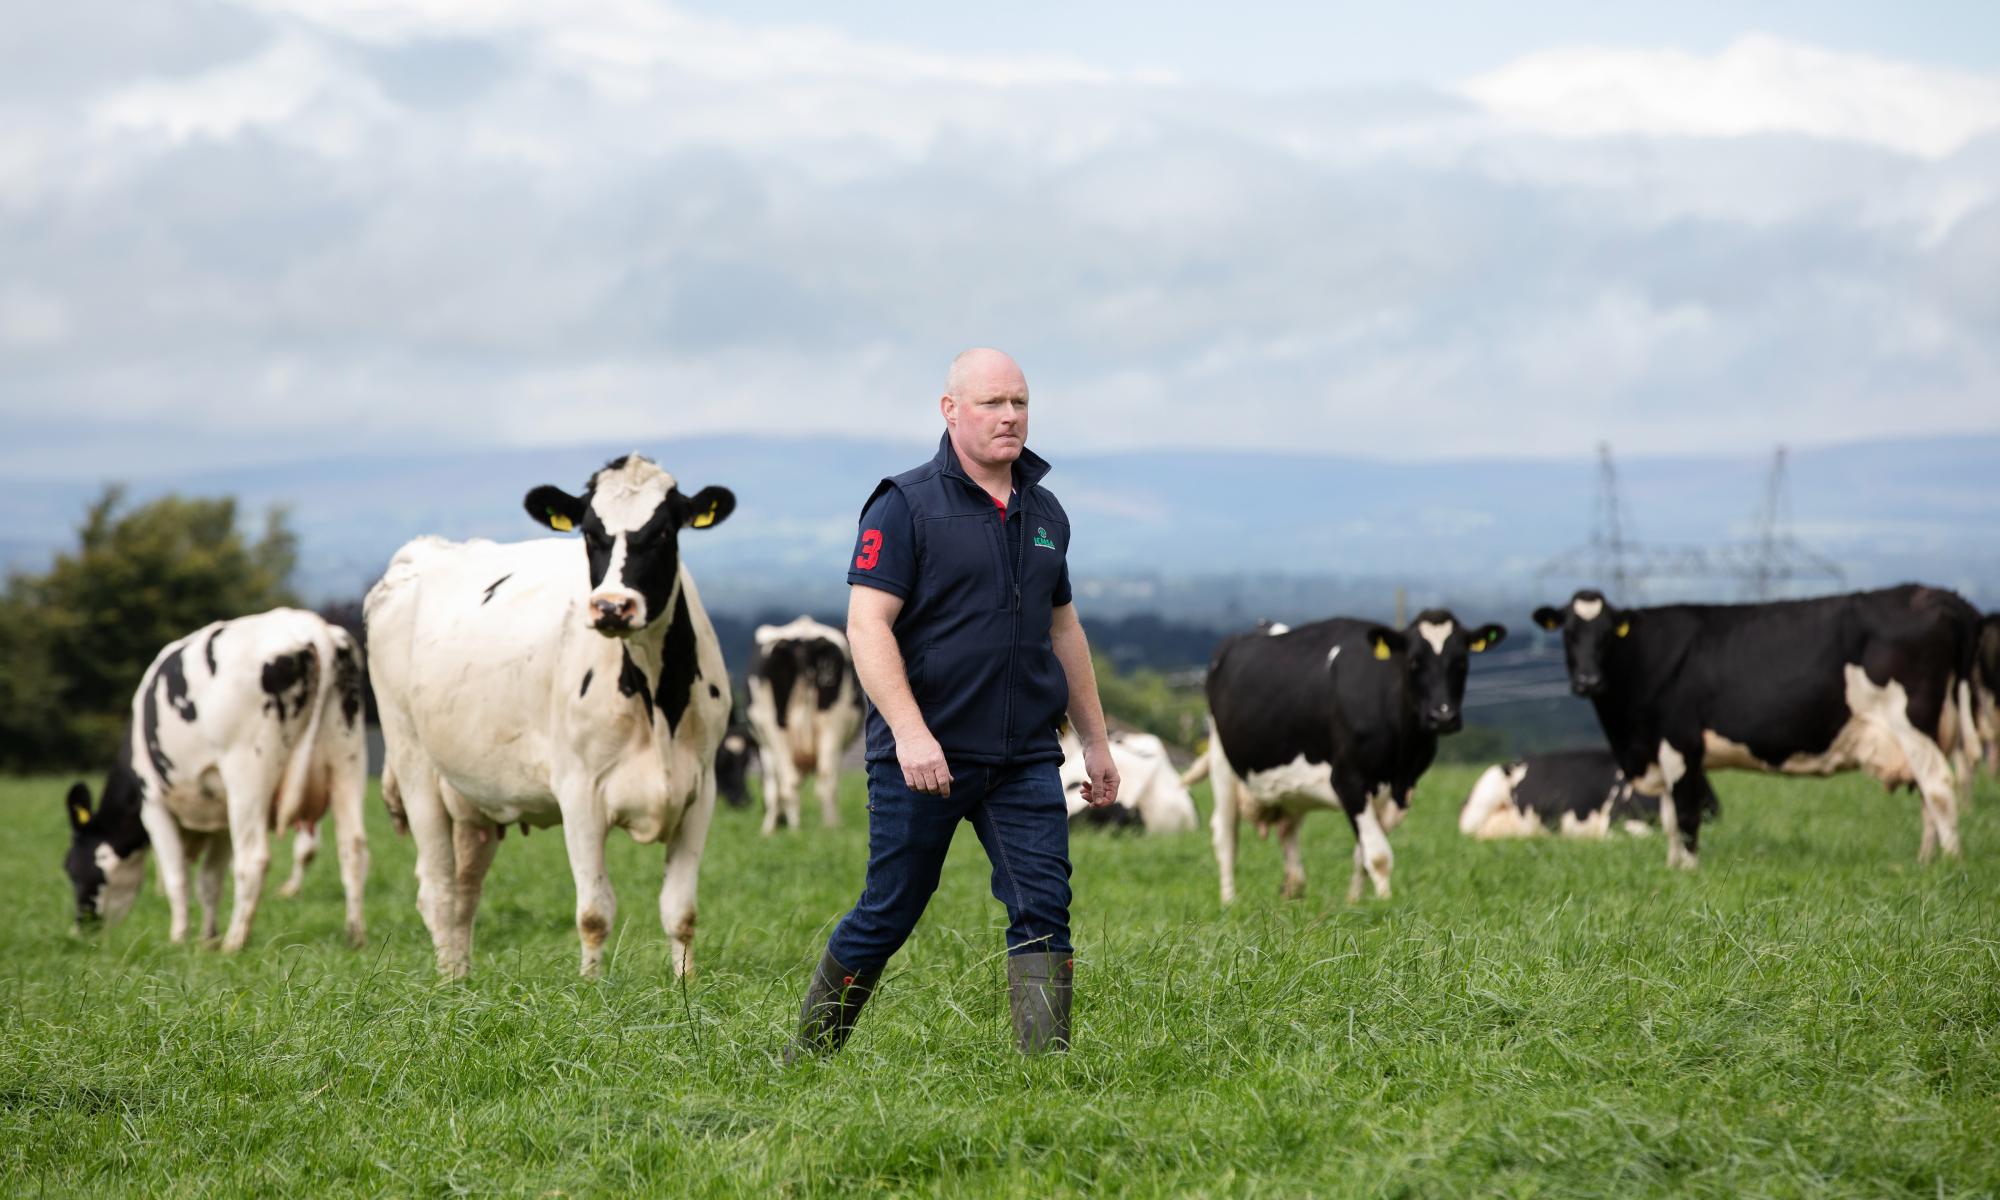 Irish farmers say they will be forced to cull cows to meet climate targets